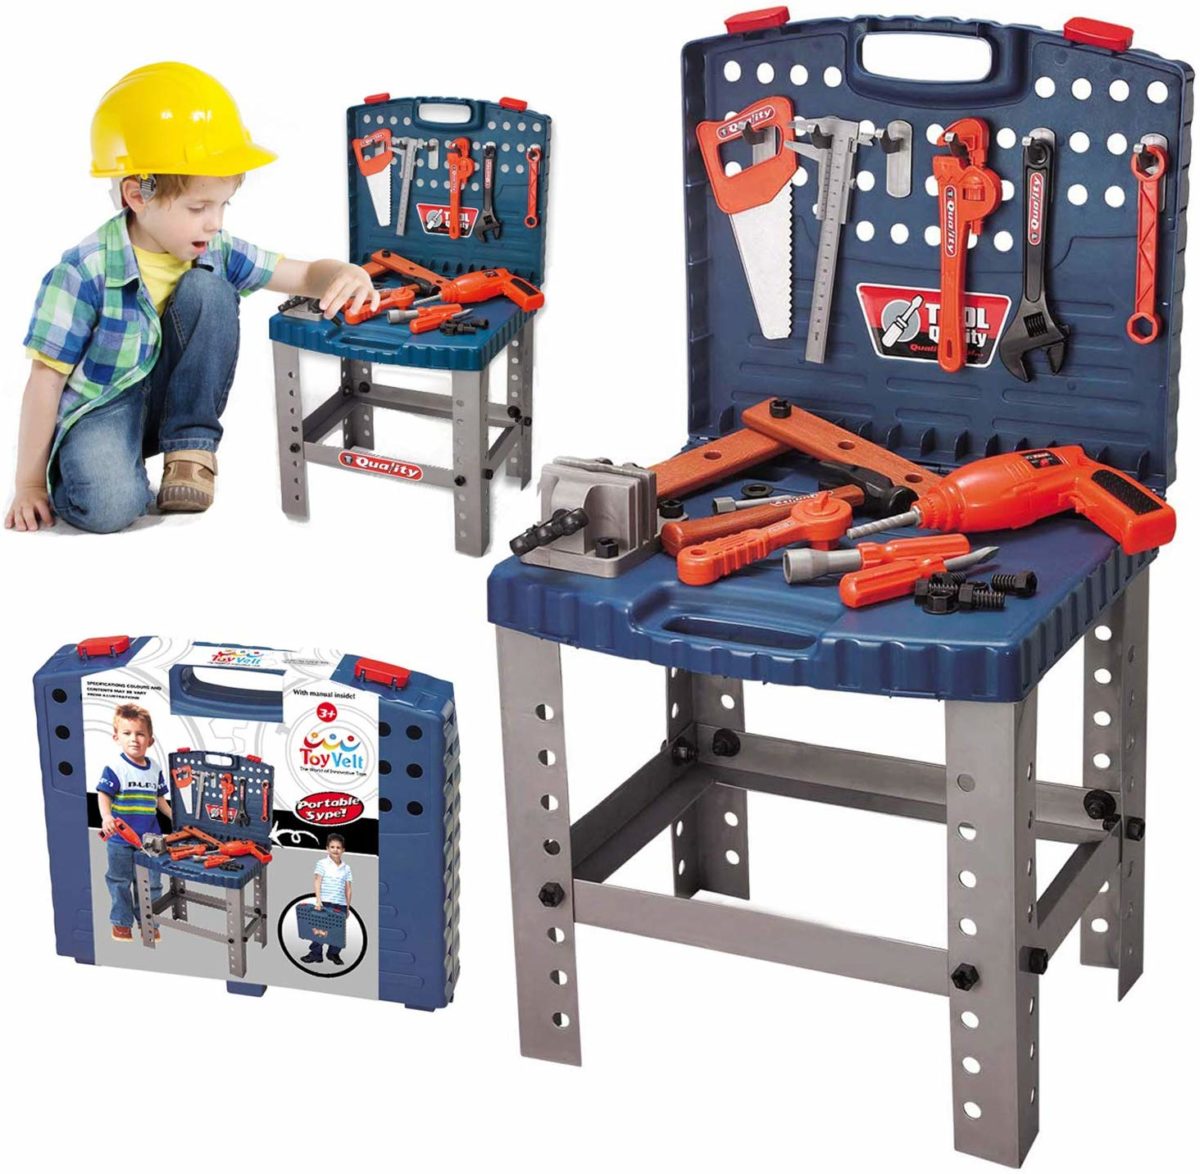 68 Piece Kids Toy Workbench - Top Toys and Gifts for Four Year Old Boys 1